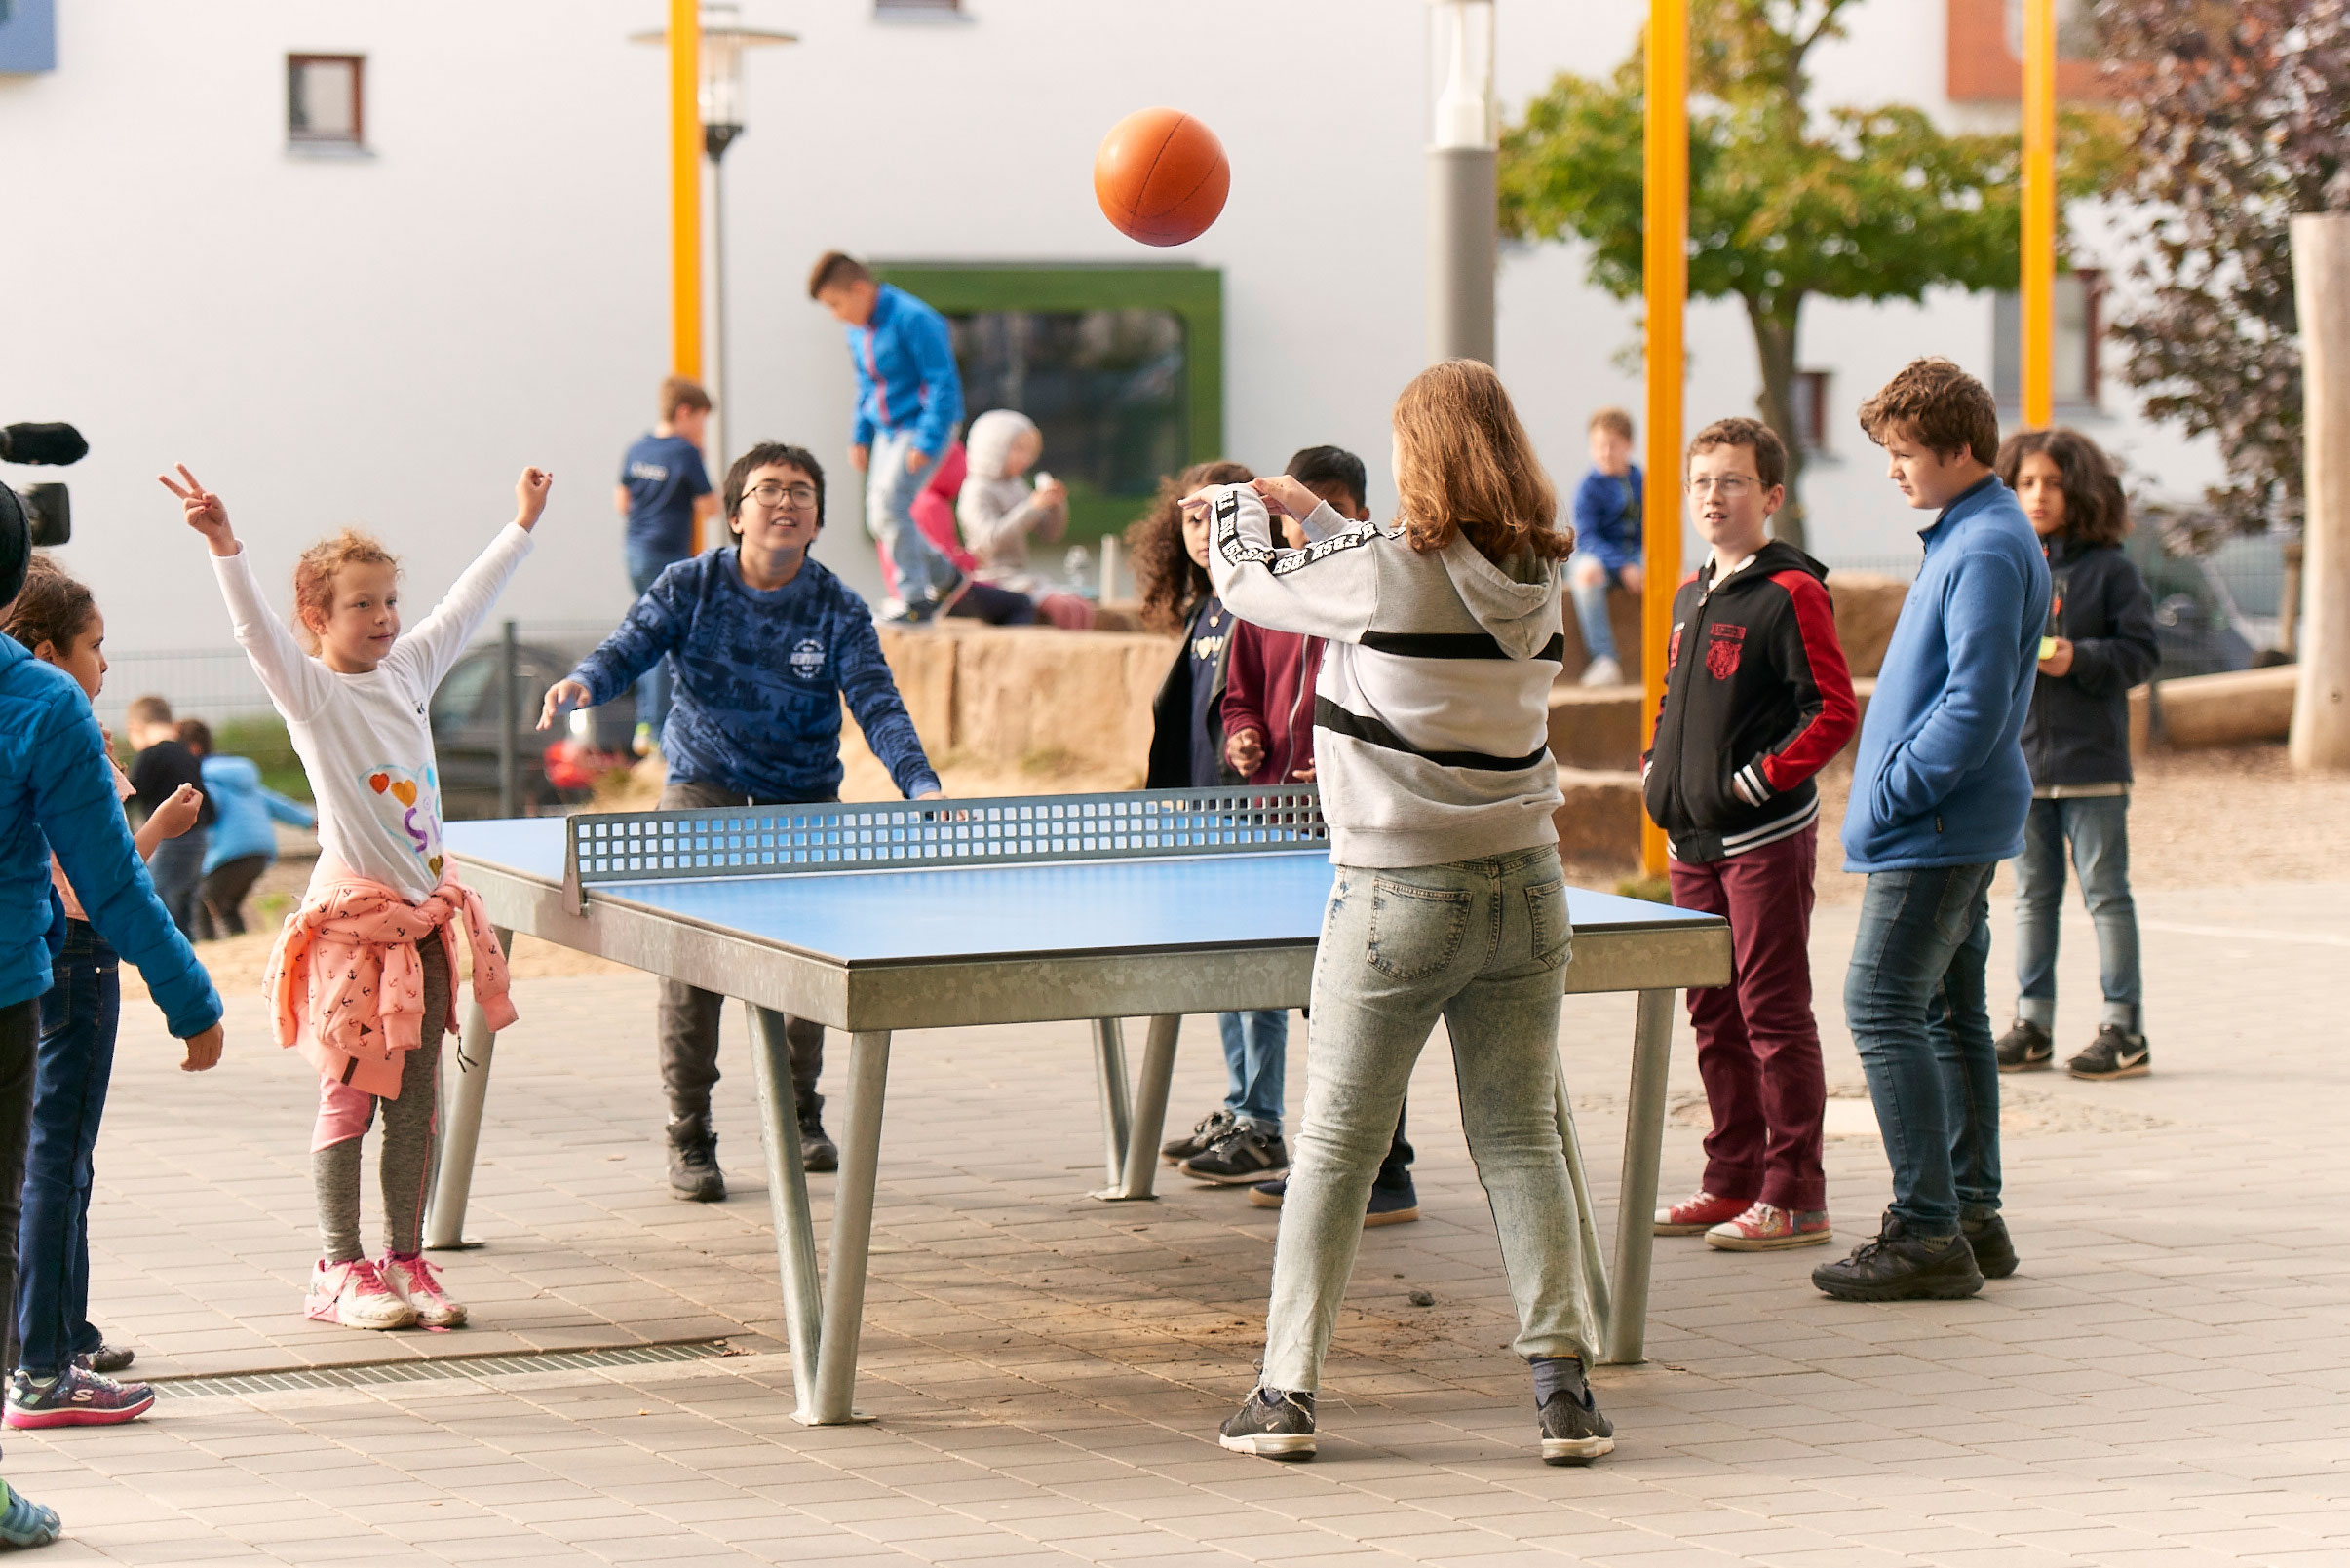 Many students are playing a game with a basketball at a table tennis table in the school yard. The ball is in the air at this moment.